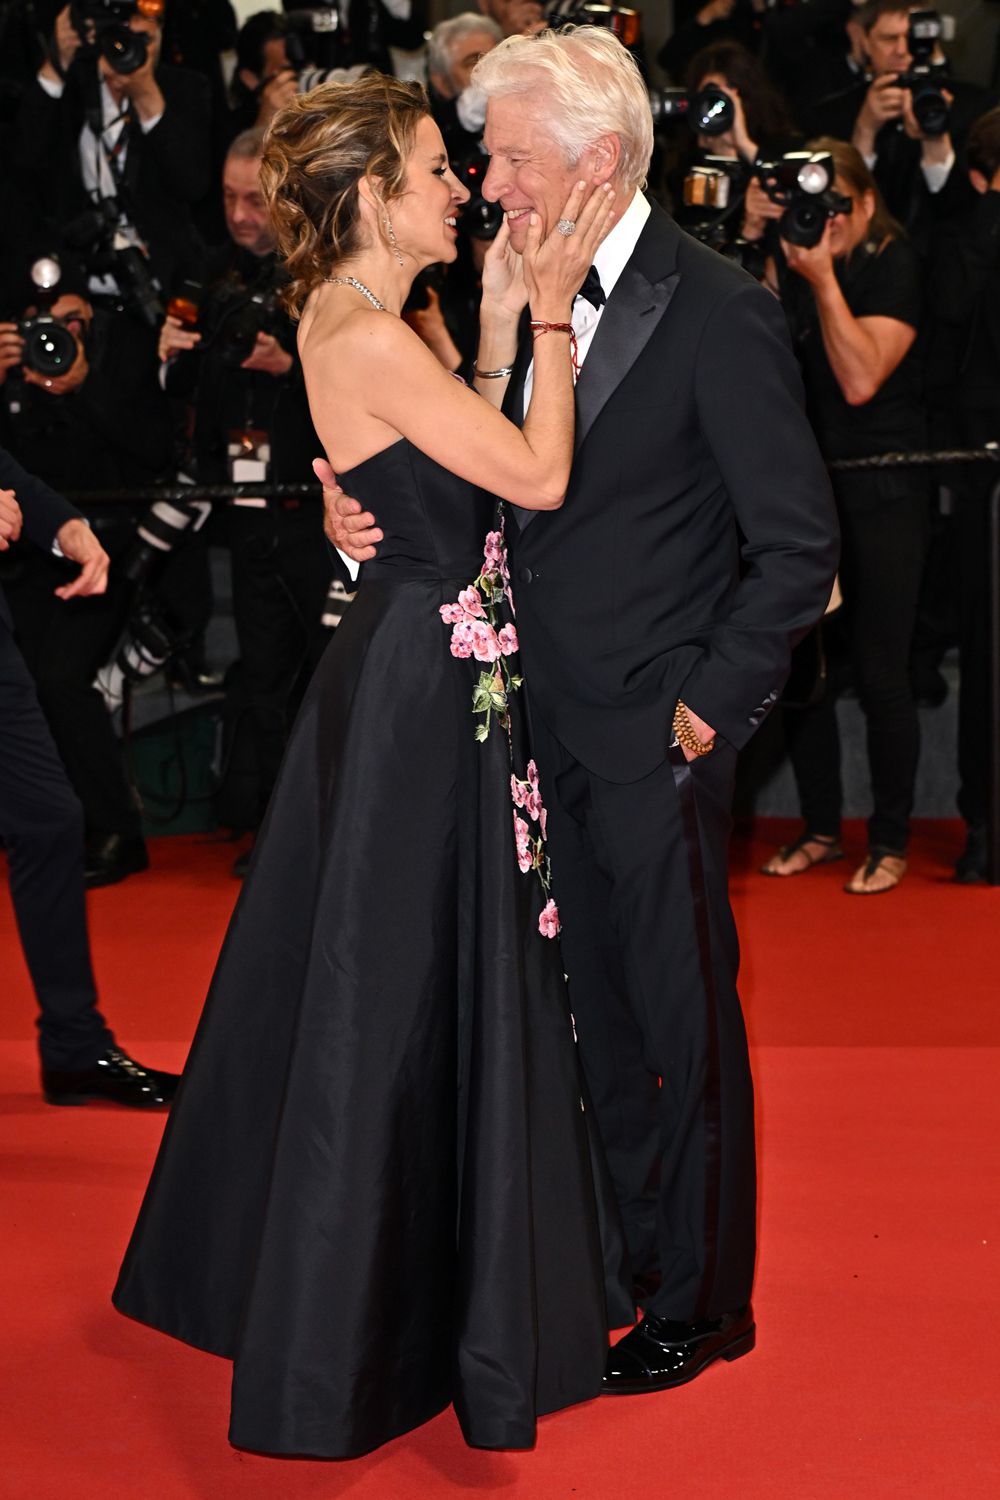 Alejandra Silva and Richard Gere attend the "Oh, Canada" Red Carpet at the 77th annual Cannes Film Festival at Palais 